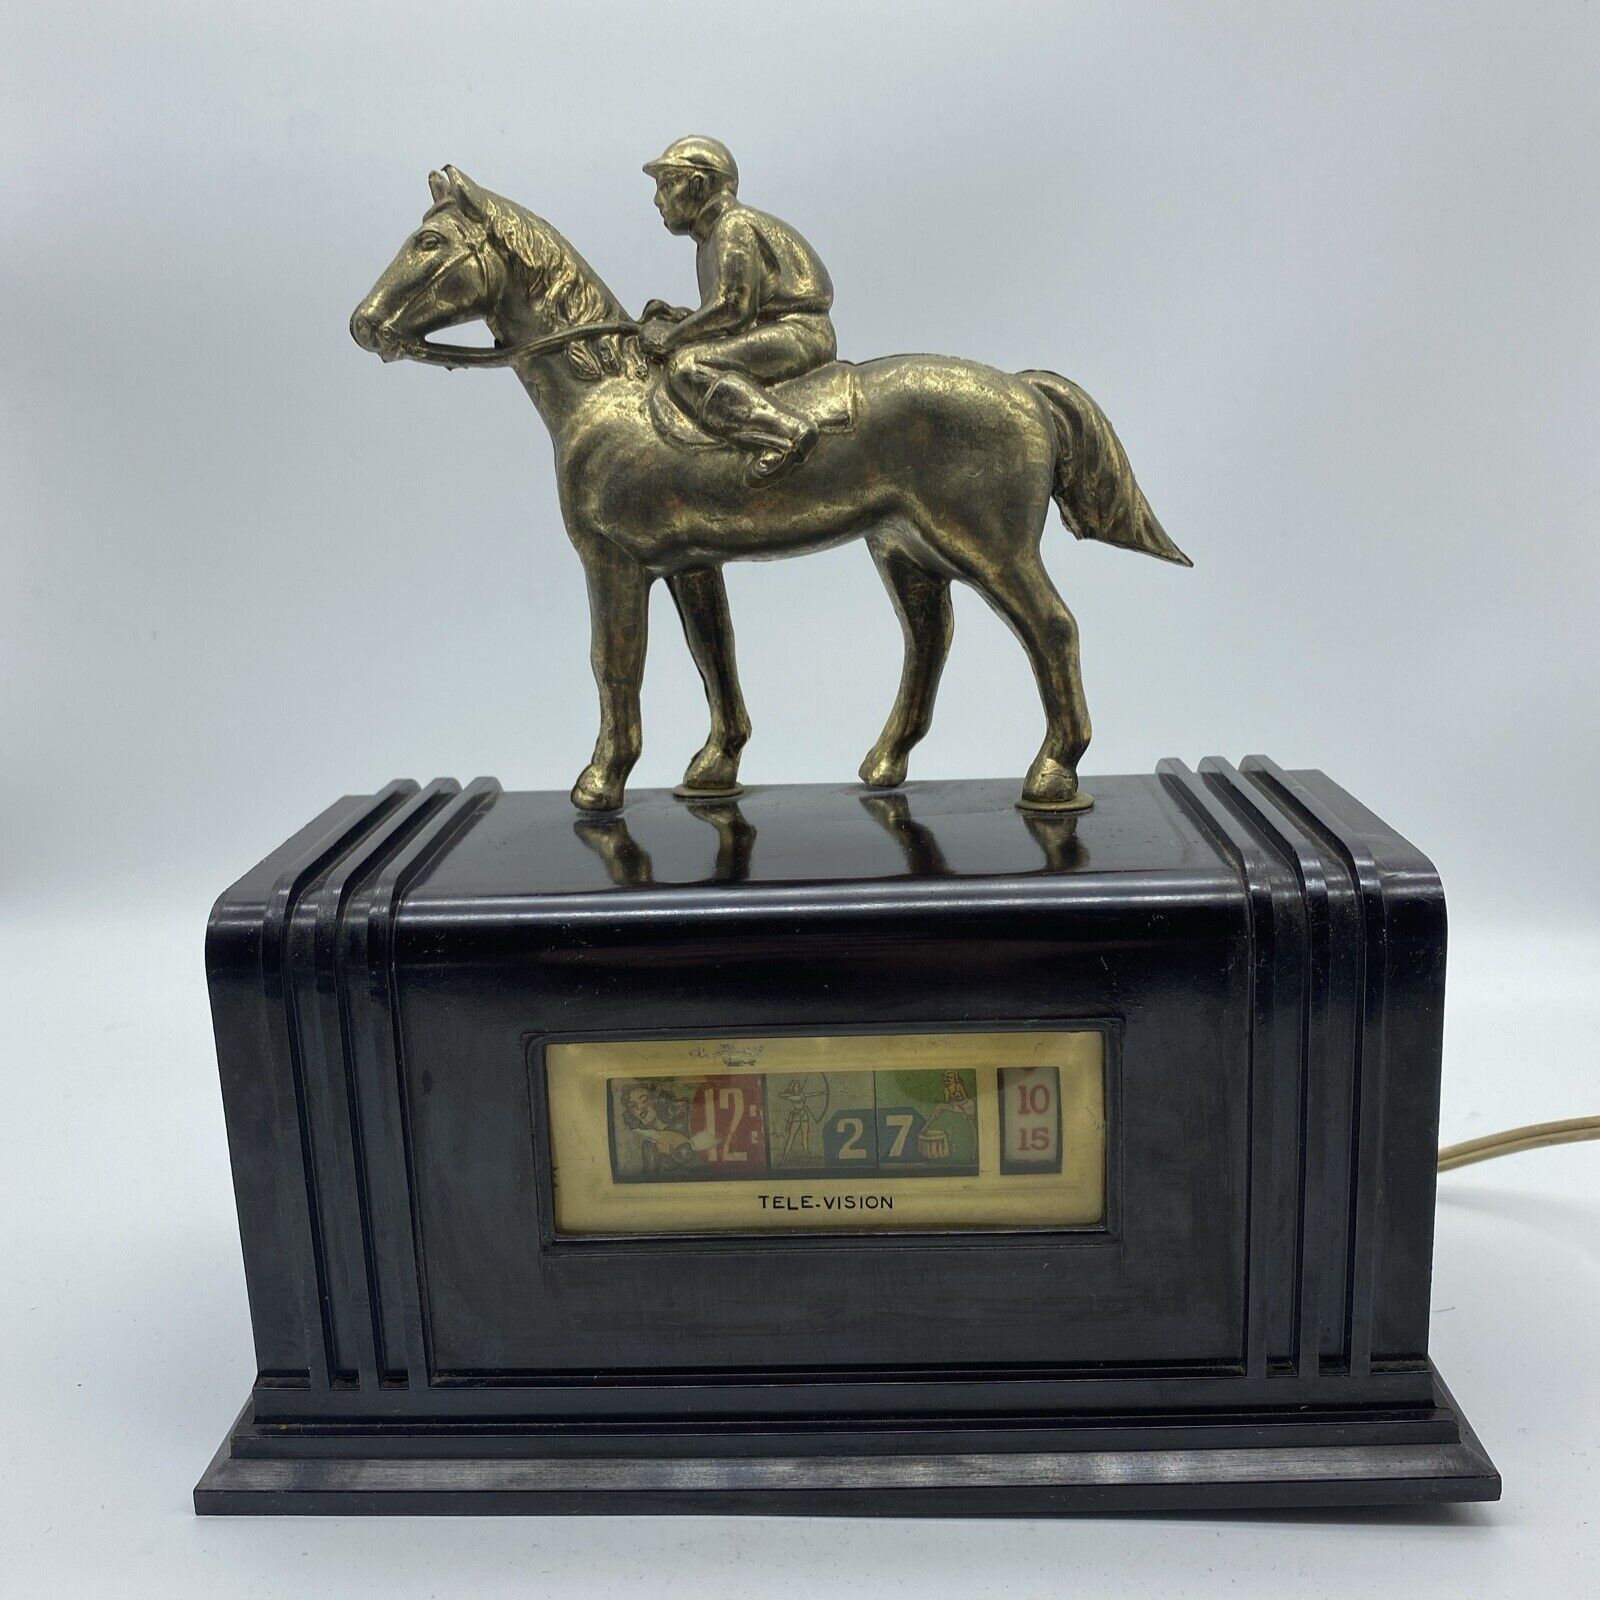 1940/50s Tele-Vision Early Flip Roll Number Clock With Jockey/Horse Pinup Risque